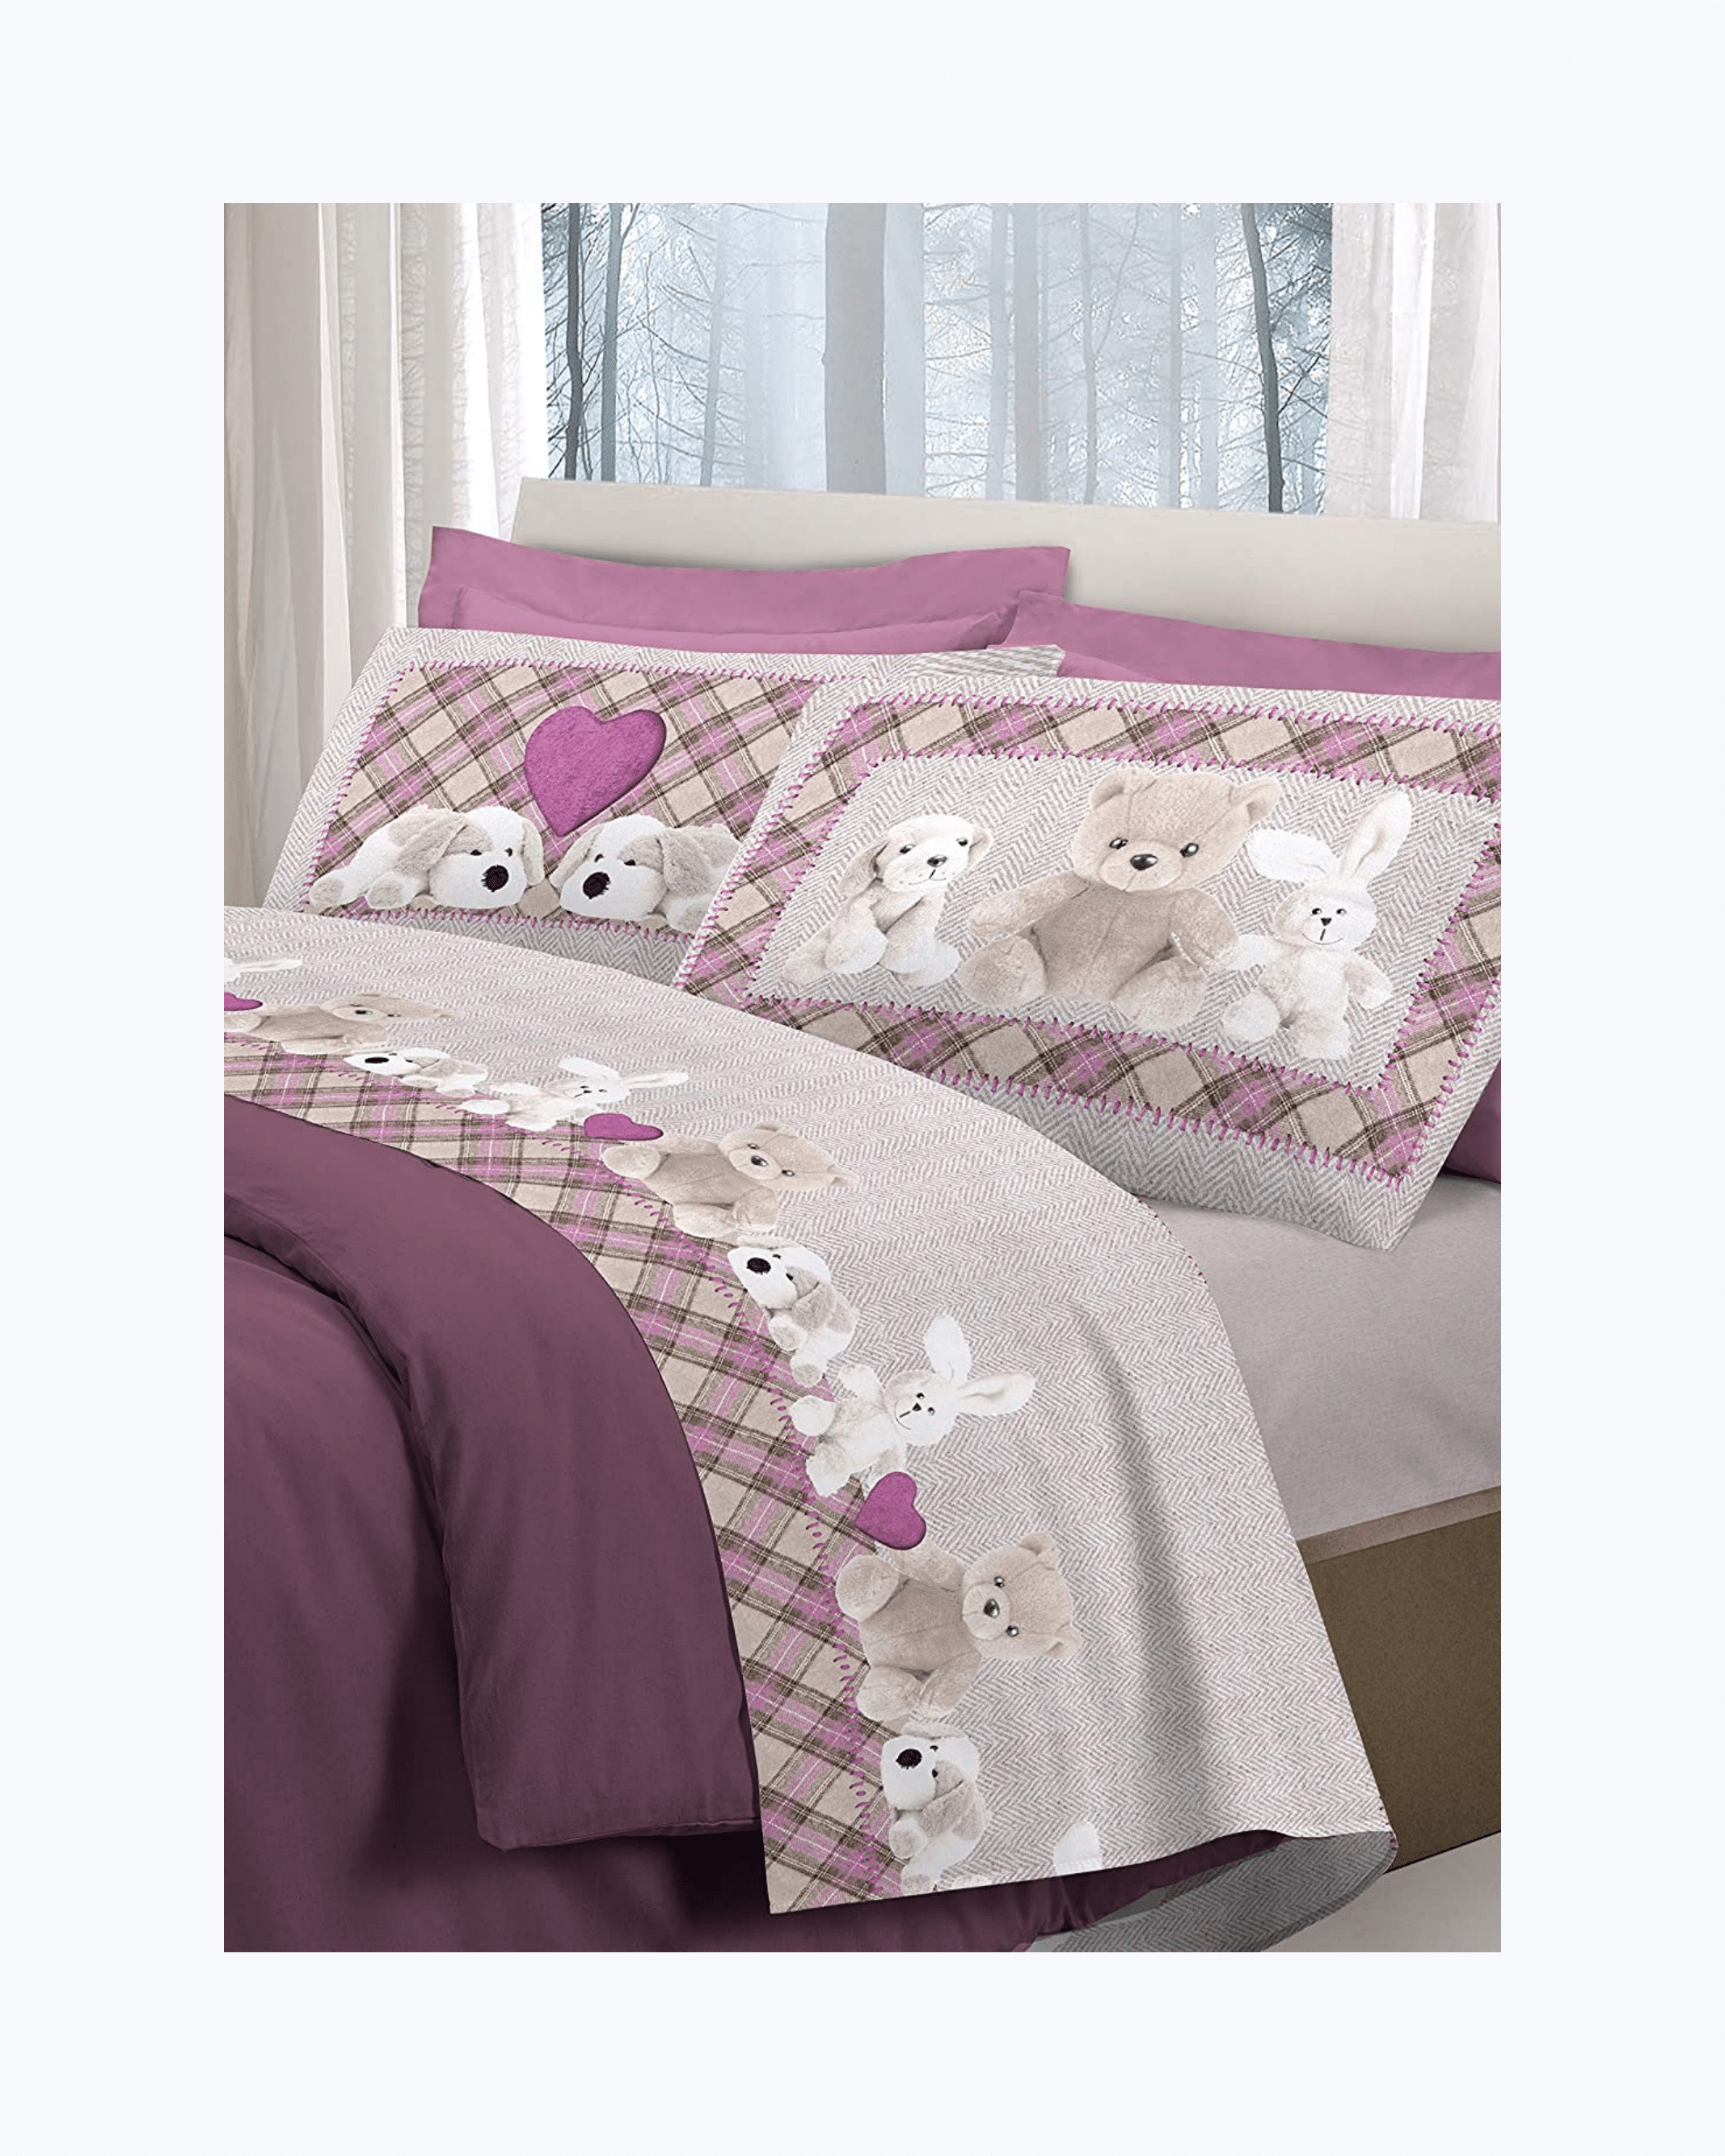 Set Lenzuola Letto in Cotone Made in Italy - Completo Letto Stampa Peluche Rosa